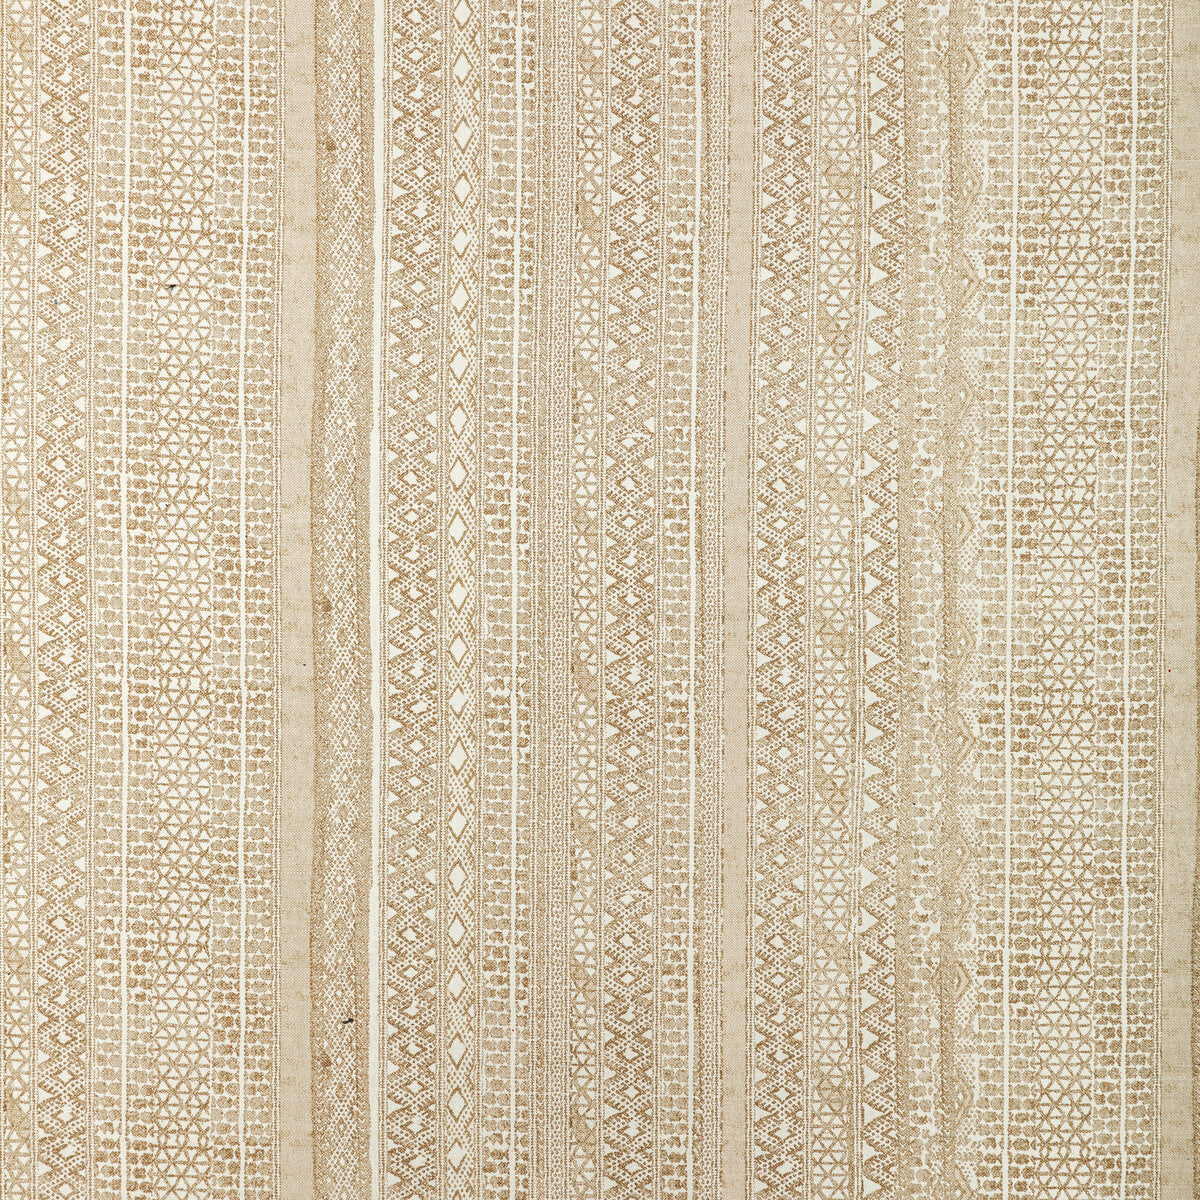 Hakan fabric in flax color - pattern 2012100.16.0 - by Lee Jofa in the Breckenridge collection